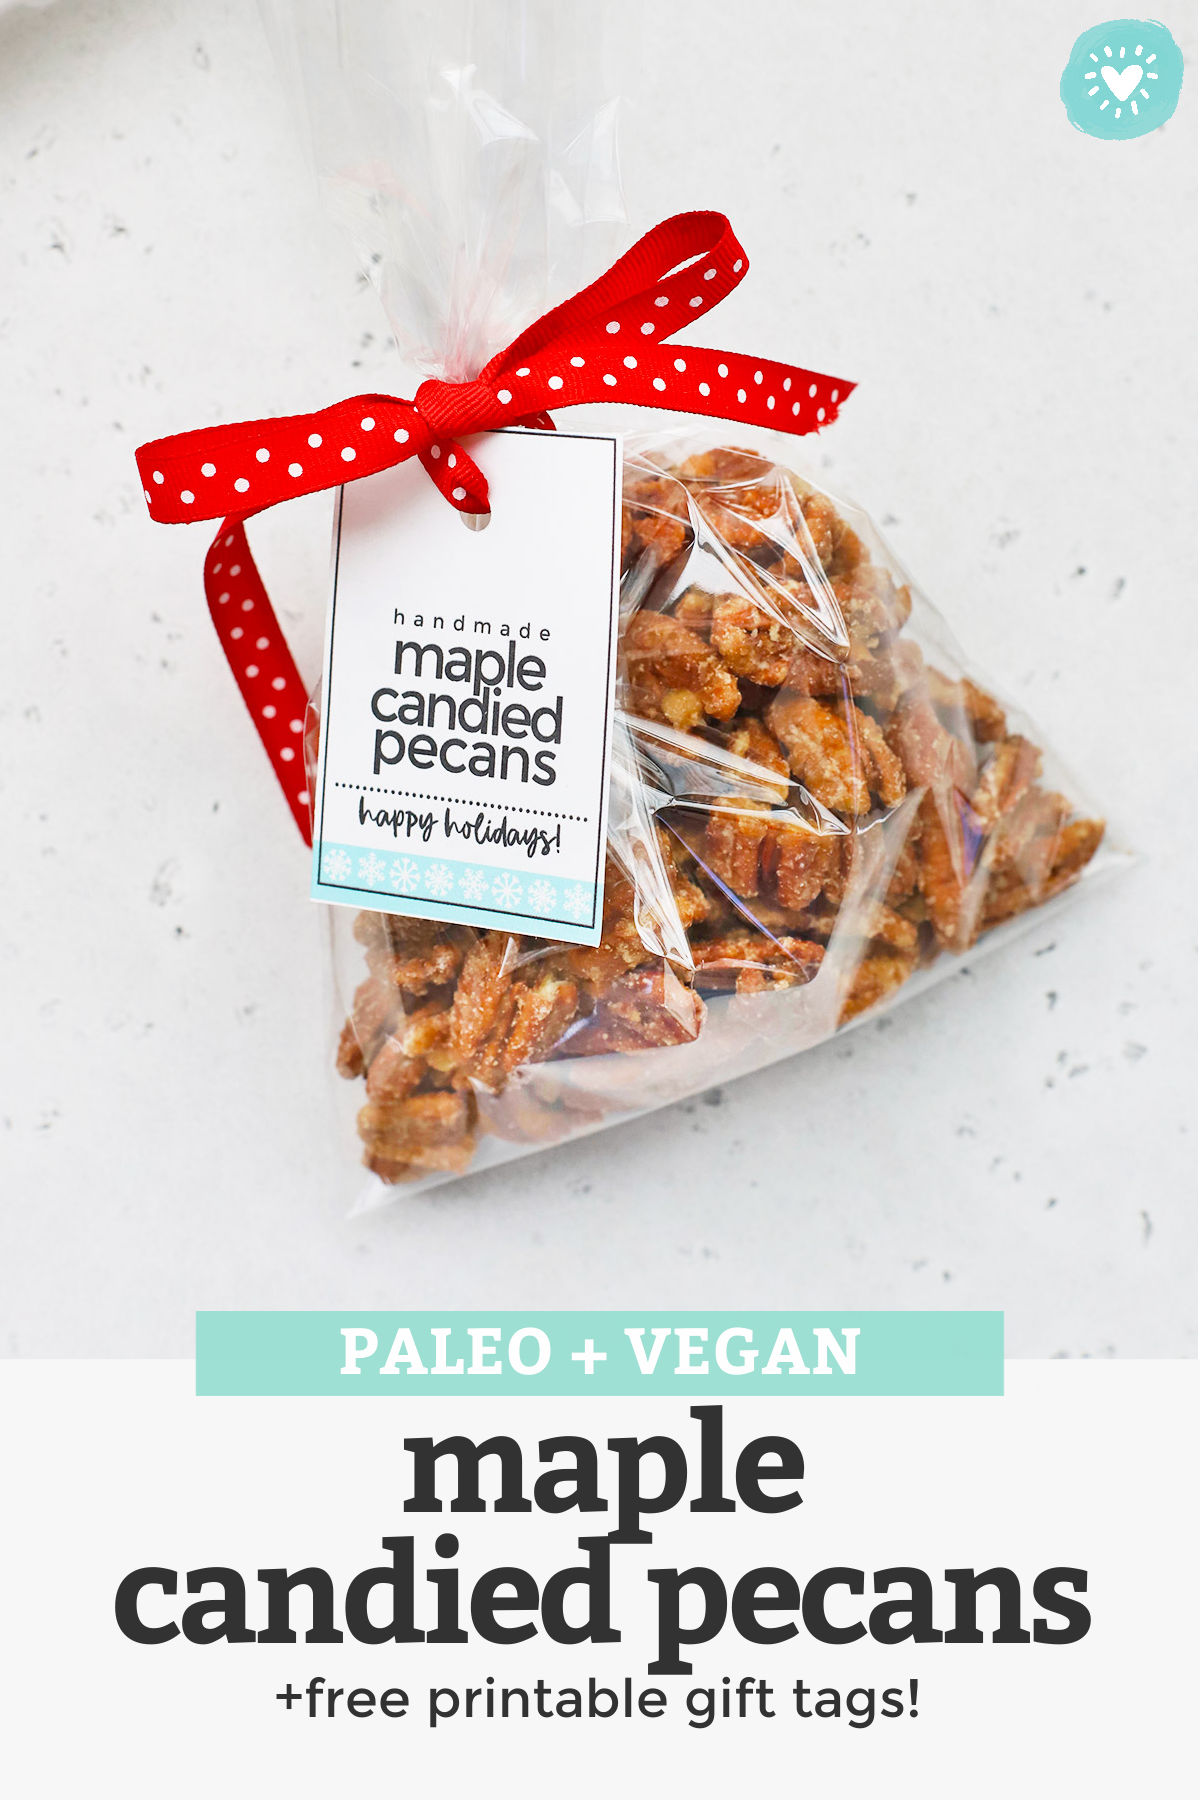 Maple Candied Pecans - These naturally sweetened candied pecans are PERFECT for snacking, holiday gifting, or topping your favorite salad. You'll love them as much as we do! Don't forget the free printable gift tag for gifting! (Paleo + Vegan) // Paleo Candied Pecans // Healthy Candied Pecans // Edible Gift // Holiday Gift // Printable Gift Tag // Cinnamon Candied Pecans #candiedpecans #ediblegift #holidaygift #gifttag